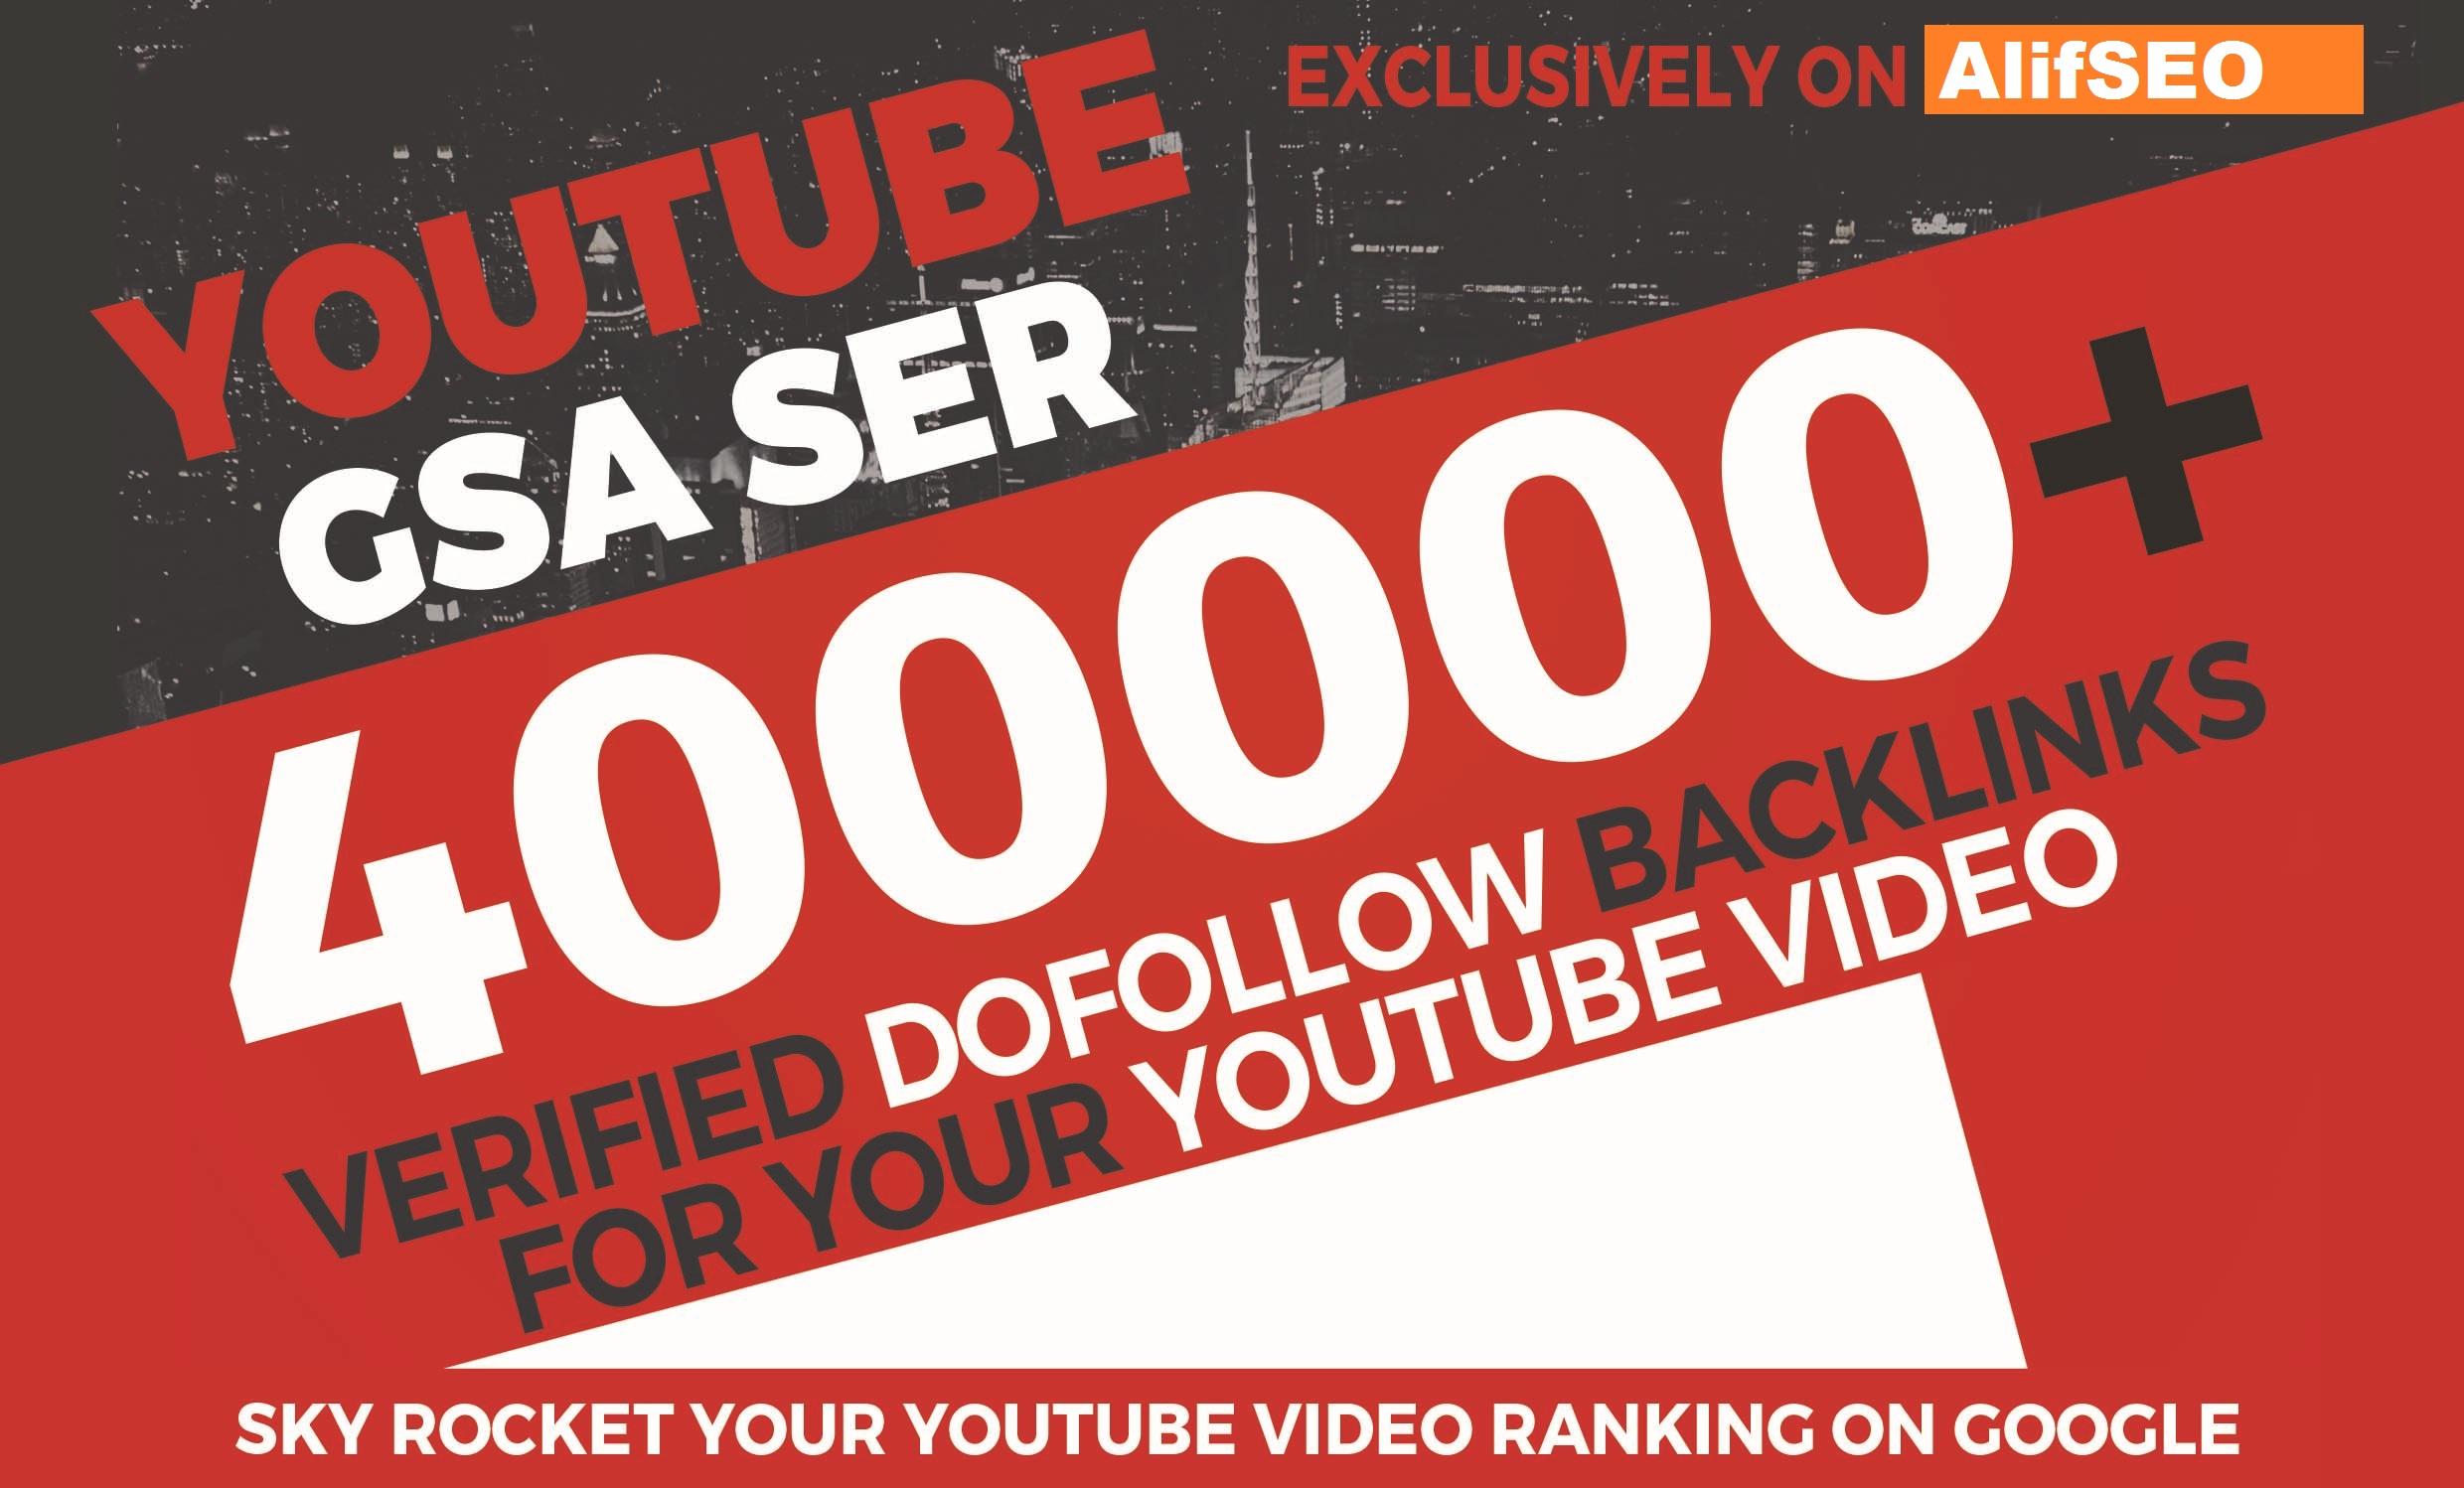 400,000 YouTube GSA SER Verified Backlinks to rank your video in Google